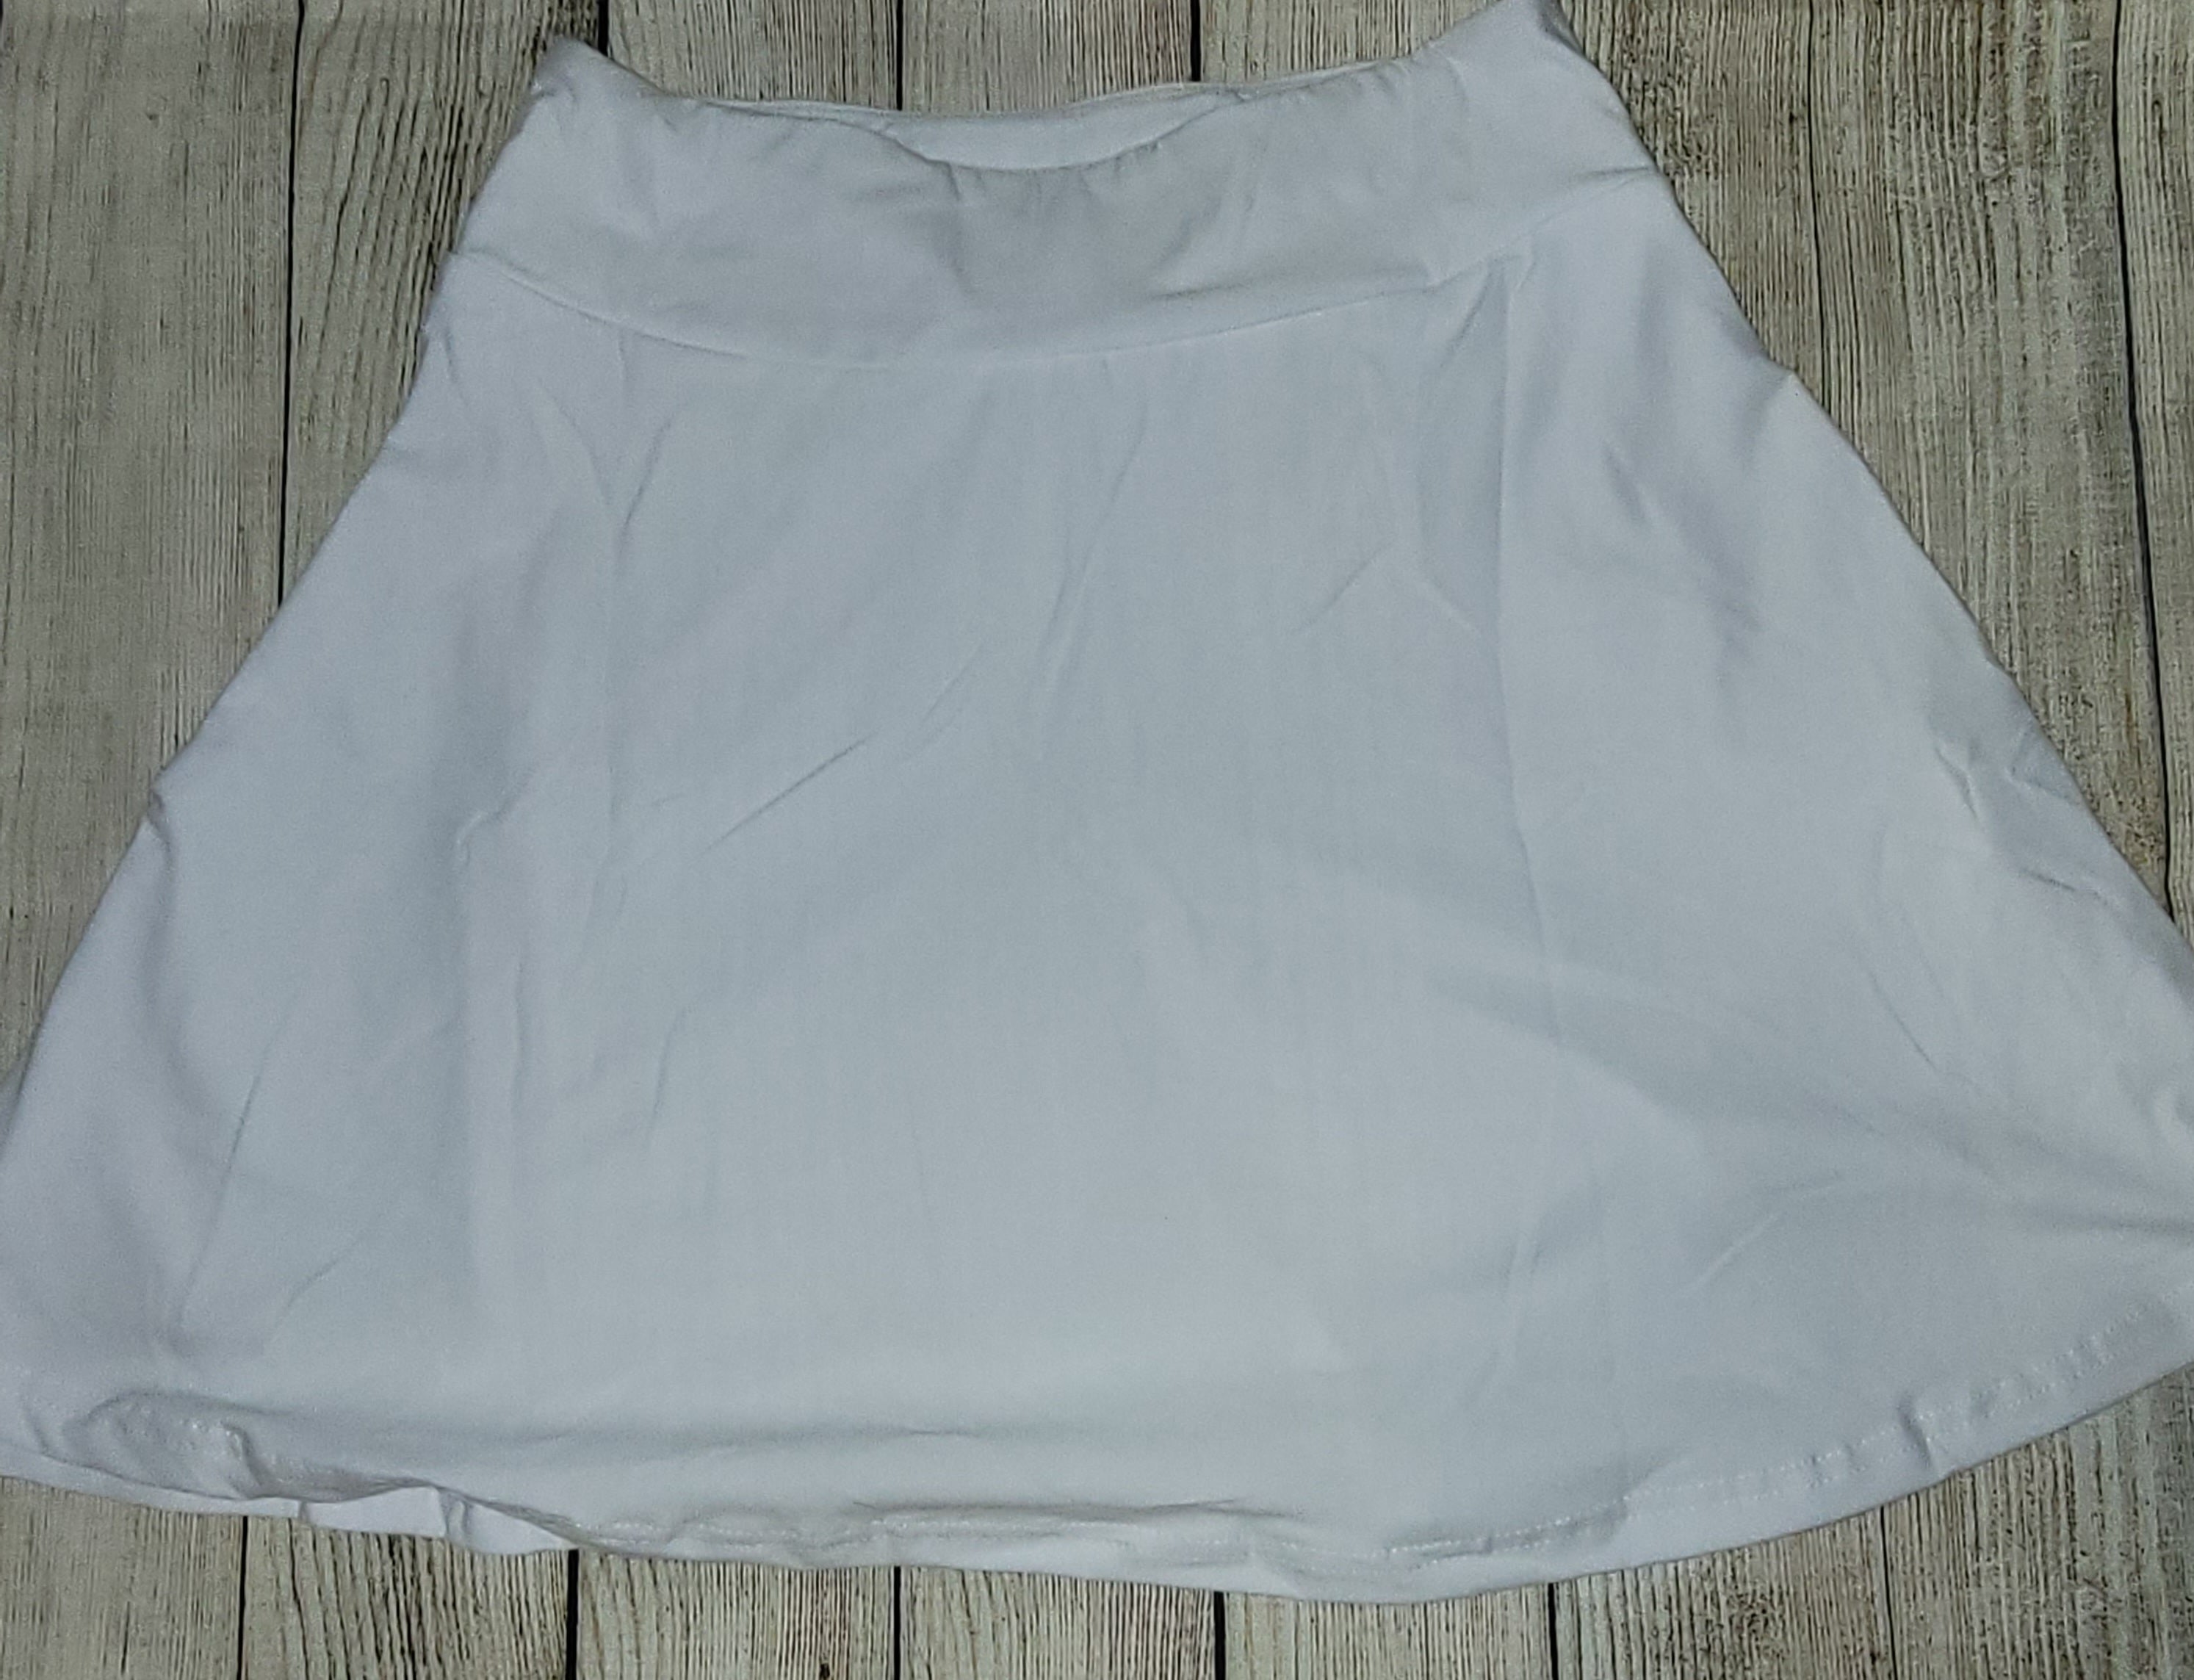 Solid white skorts with pockets